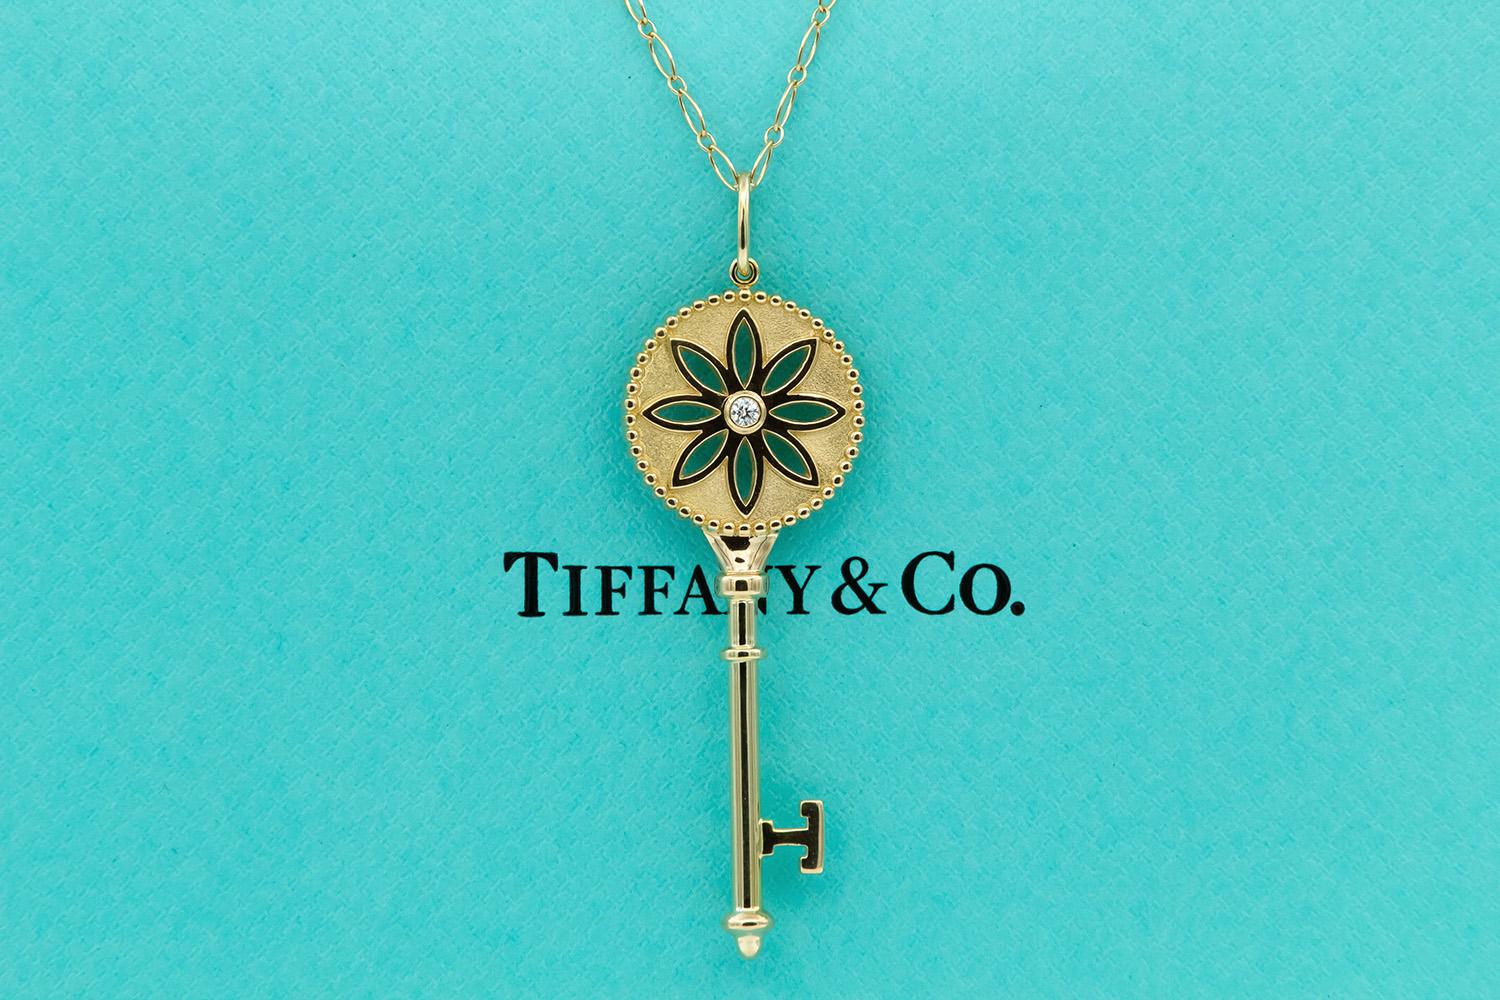 We are pleased to offer this Authentic Tiffany & Co. 18k Yellow Gold & Diamond Daisy Key Large Pendant Necklace. This gorgeous piece features a 2.5 inch 18k yellow gold Tiffany & Co. daisy key pendant set with two 0.08ct round brilliant diamonds on